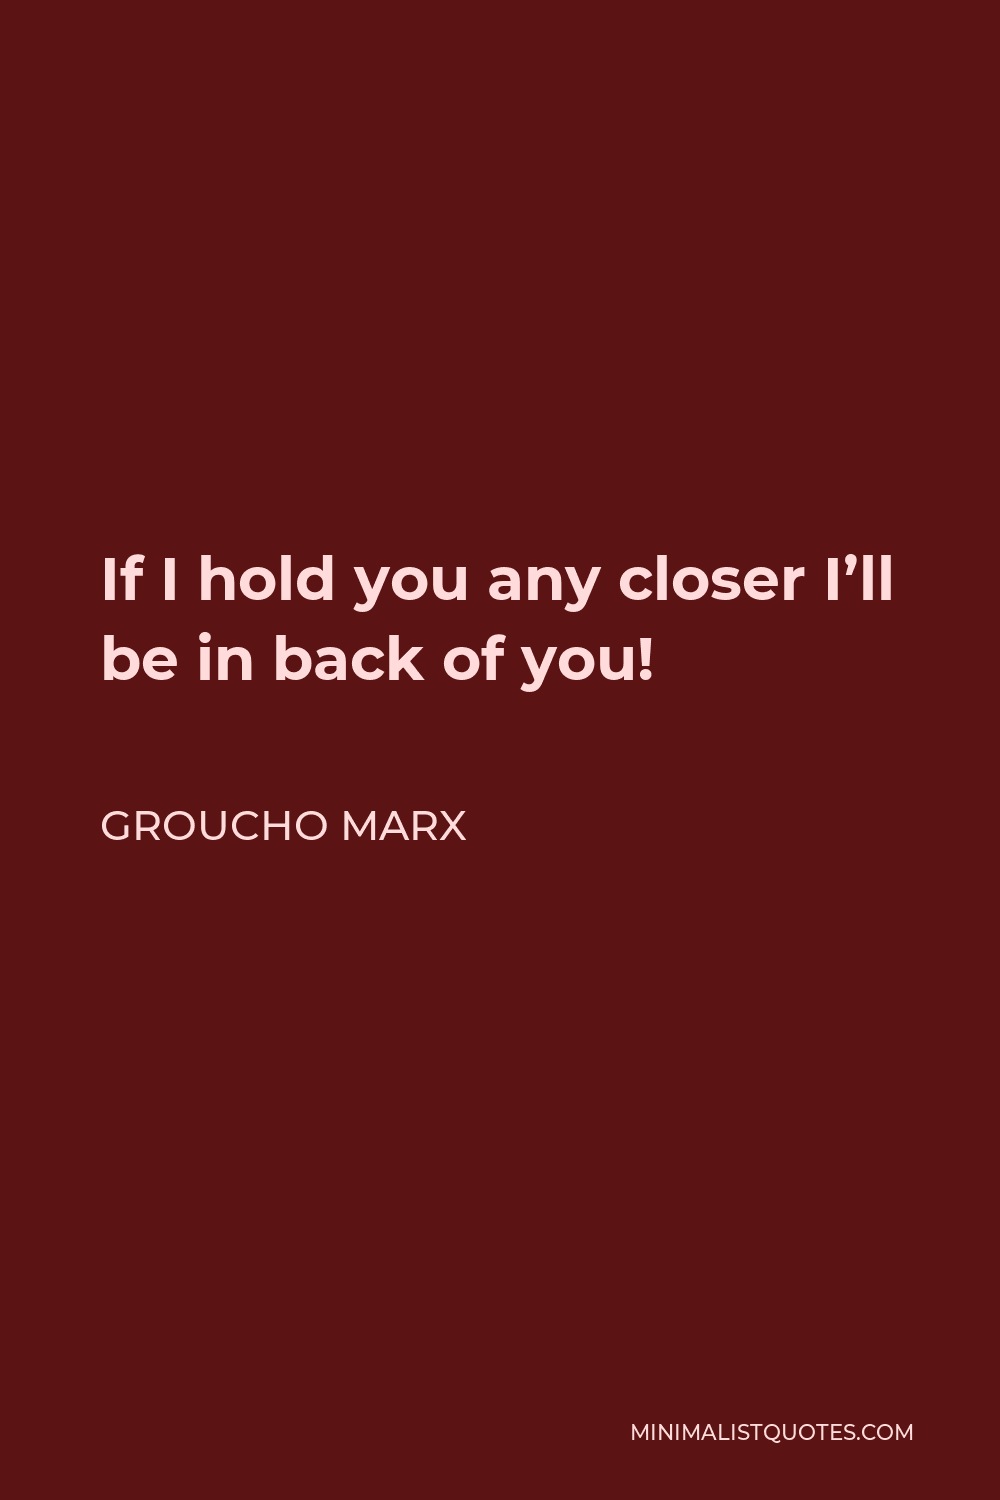 Groucho Marx Quote - If I hold you any closer I’ll be in back of you!